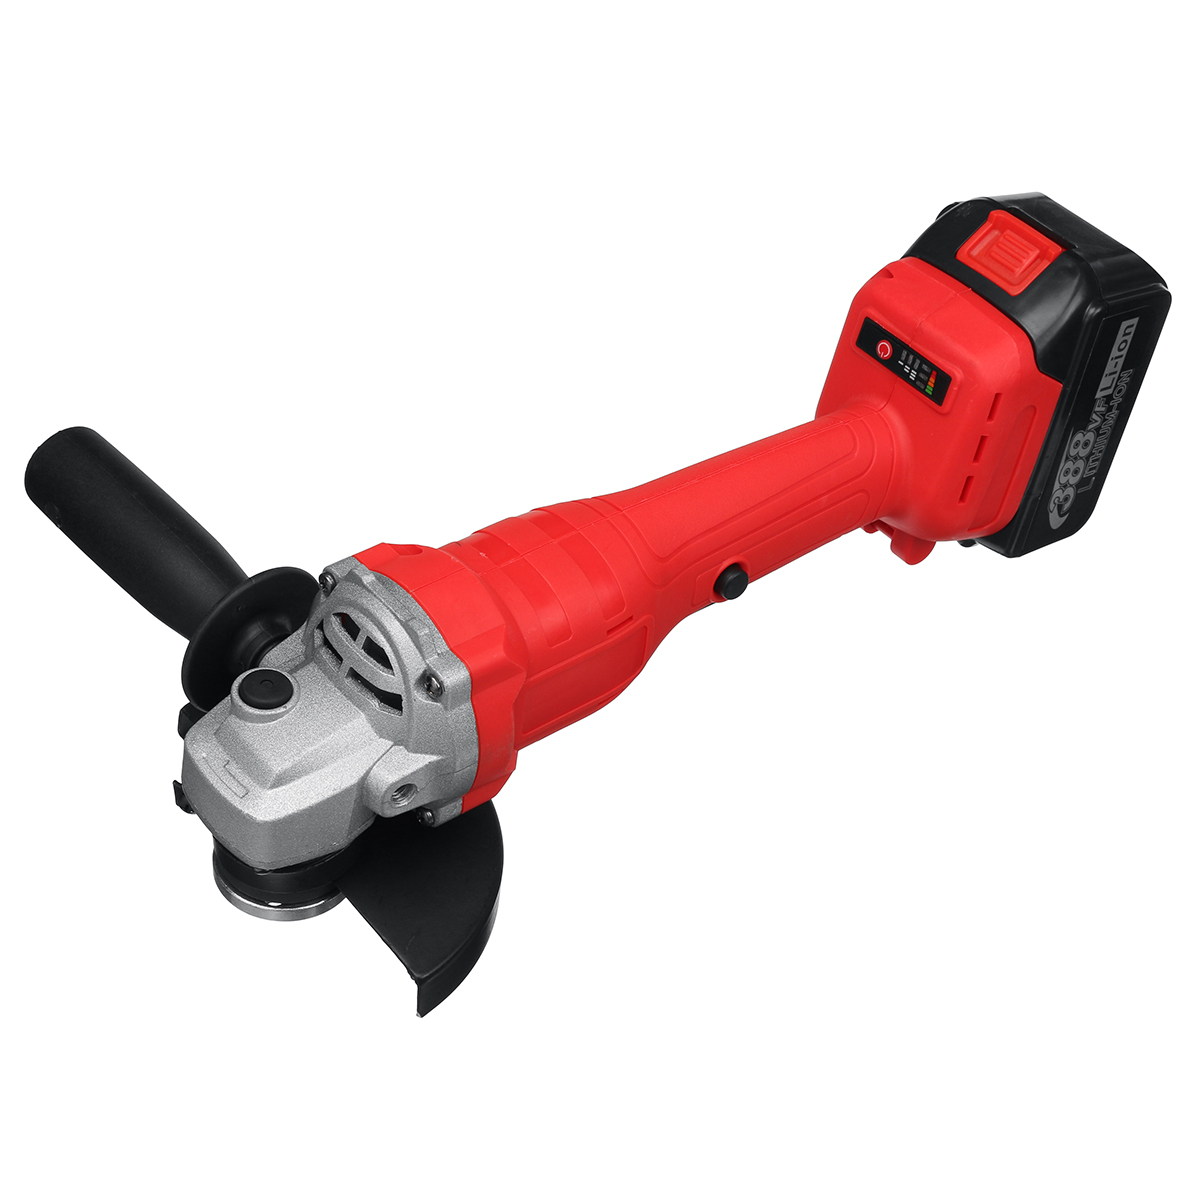 388VF-125MM-1500W-Cordless-Brushless-Angle-Grinder-Electric-Polisher-W-None12-Battery-Cutting-Sand-D-1879534-11